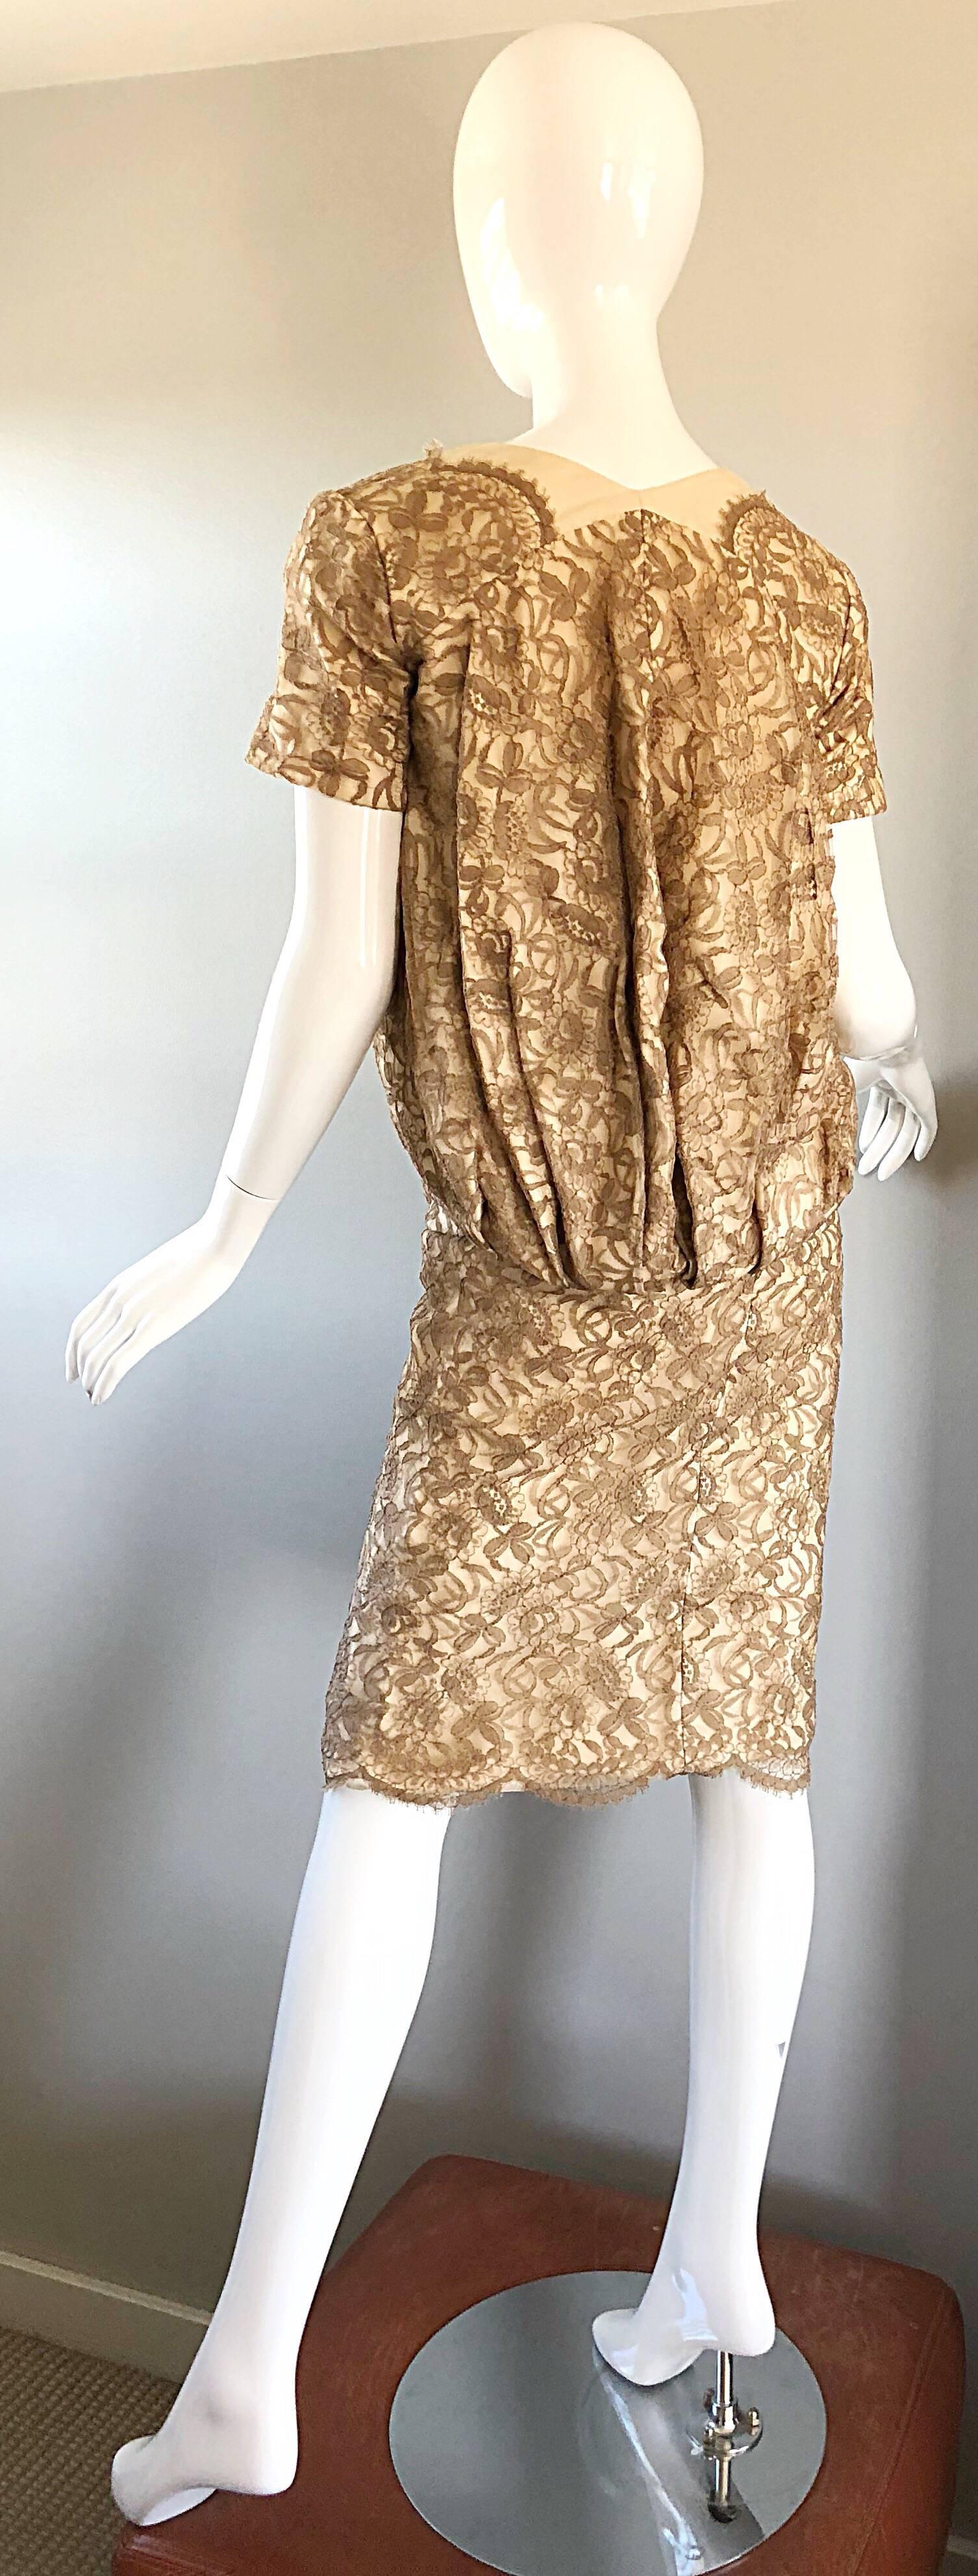 Sensational 1950s Demi Couture Nude Taupe Tan French Lace 50s Dress + Bolero In Excellent Condition For Sale In San Diego, CA